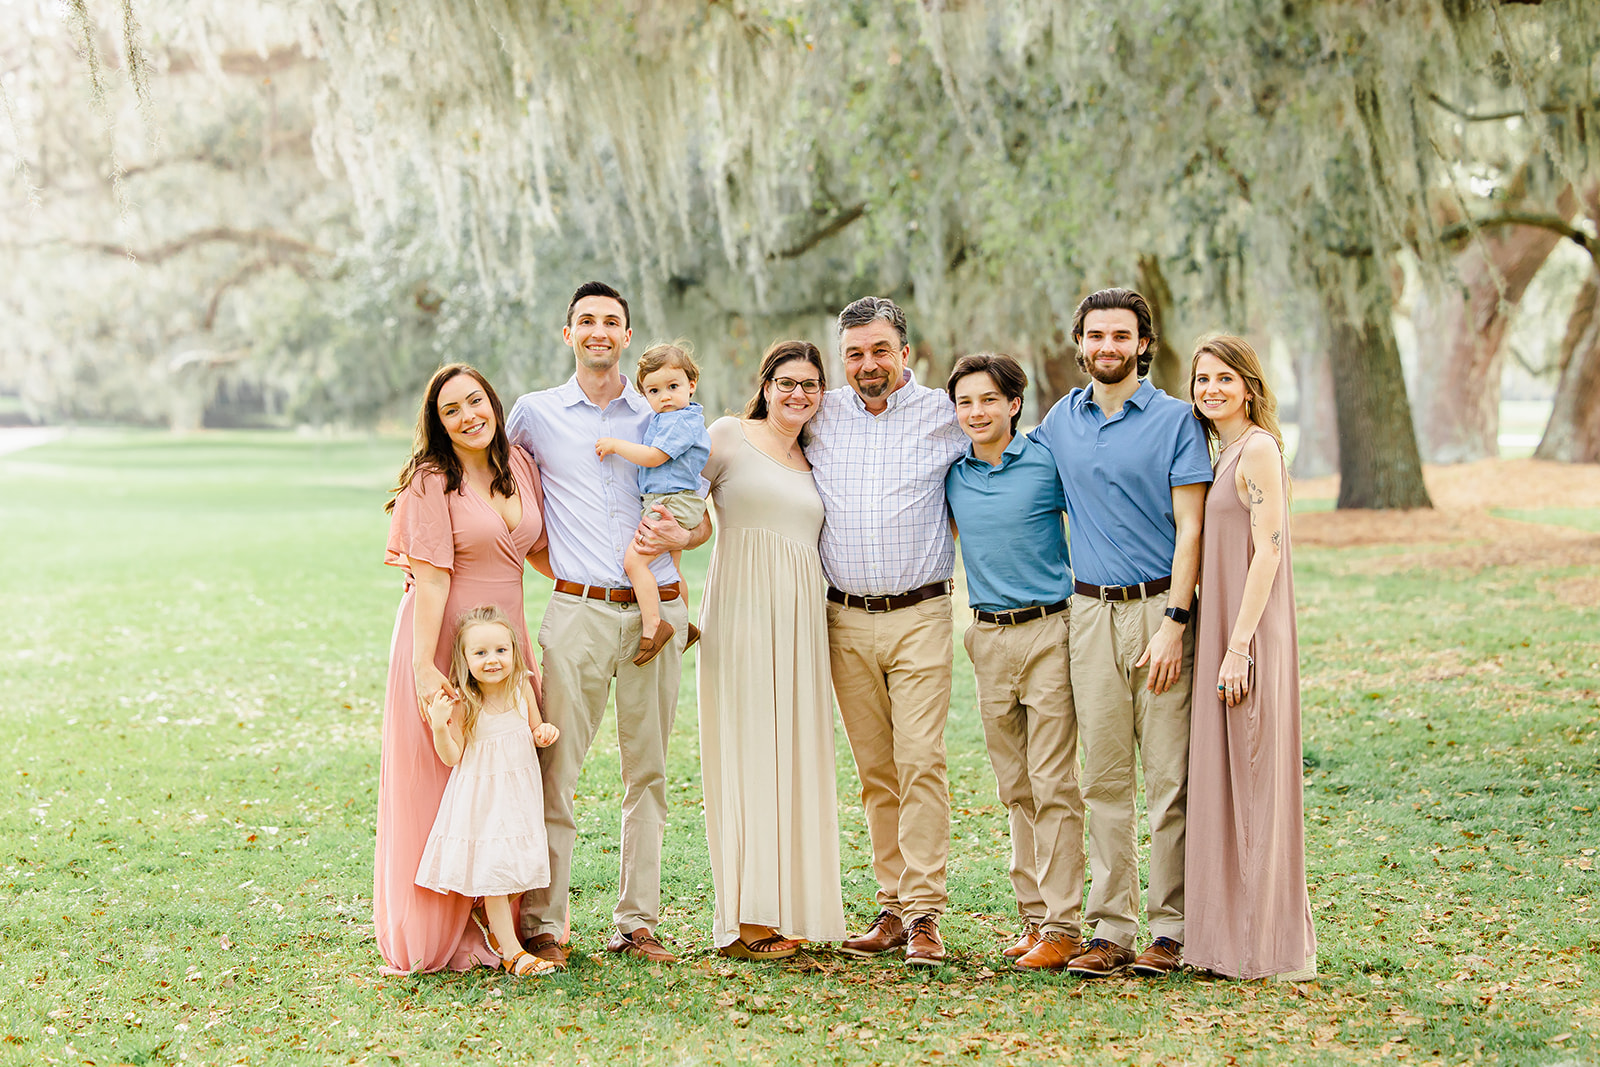 St. Simons Island 
Family Photography at The Avenue of the Oaks